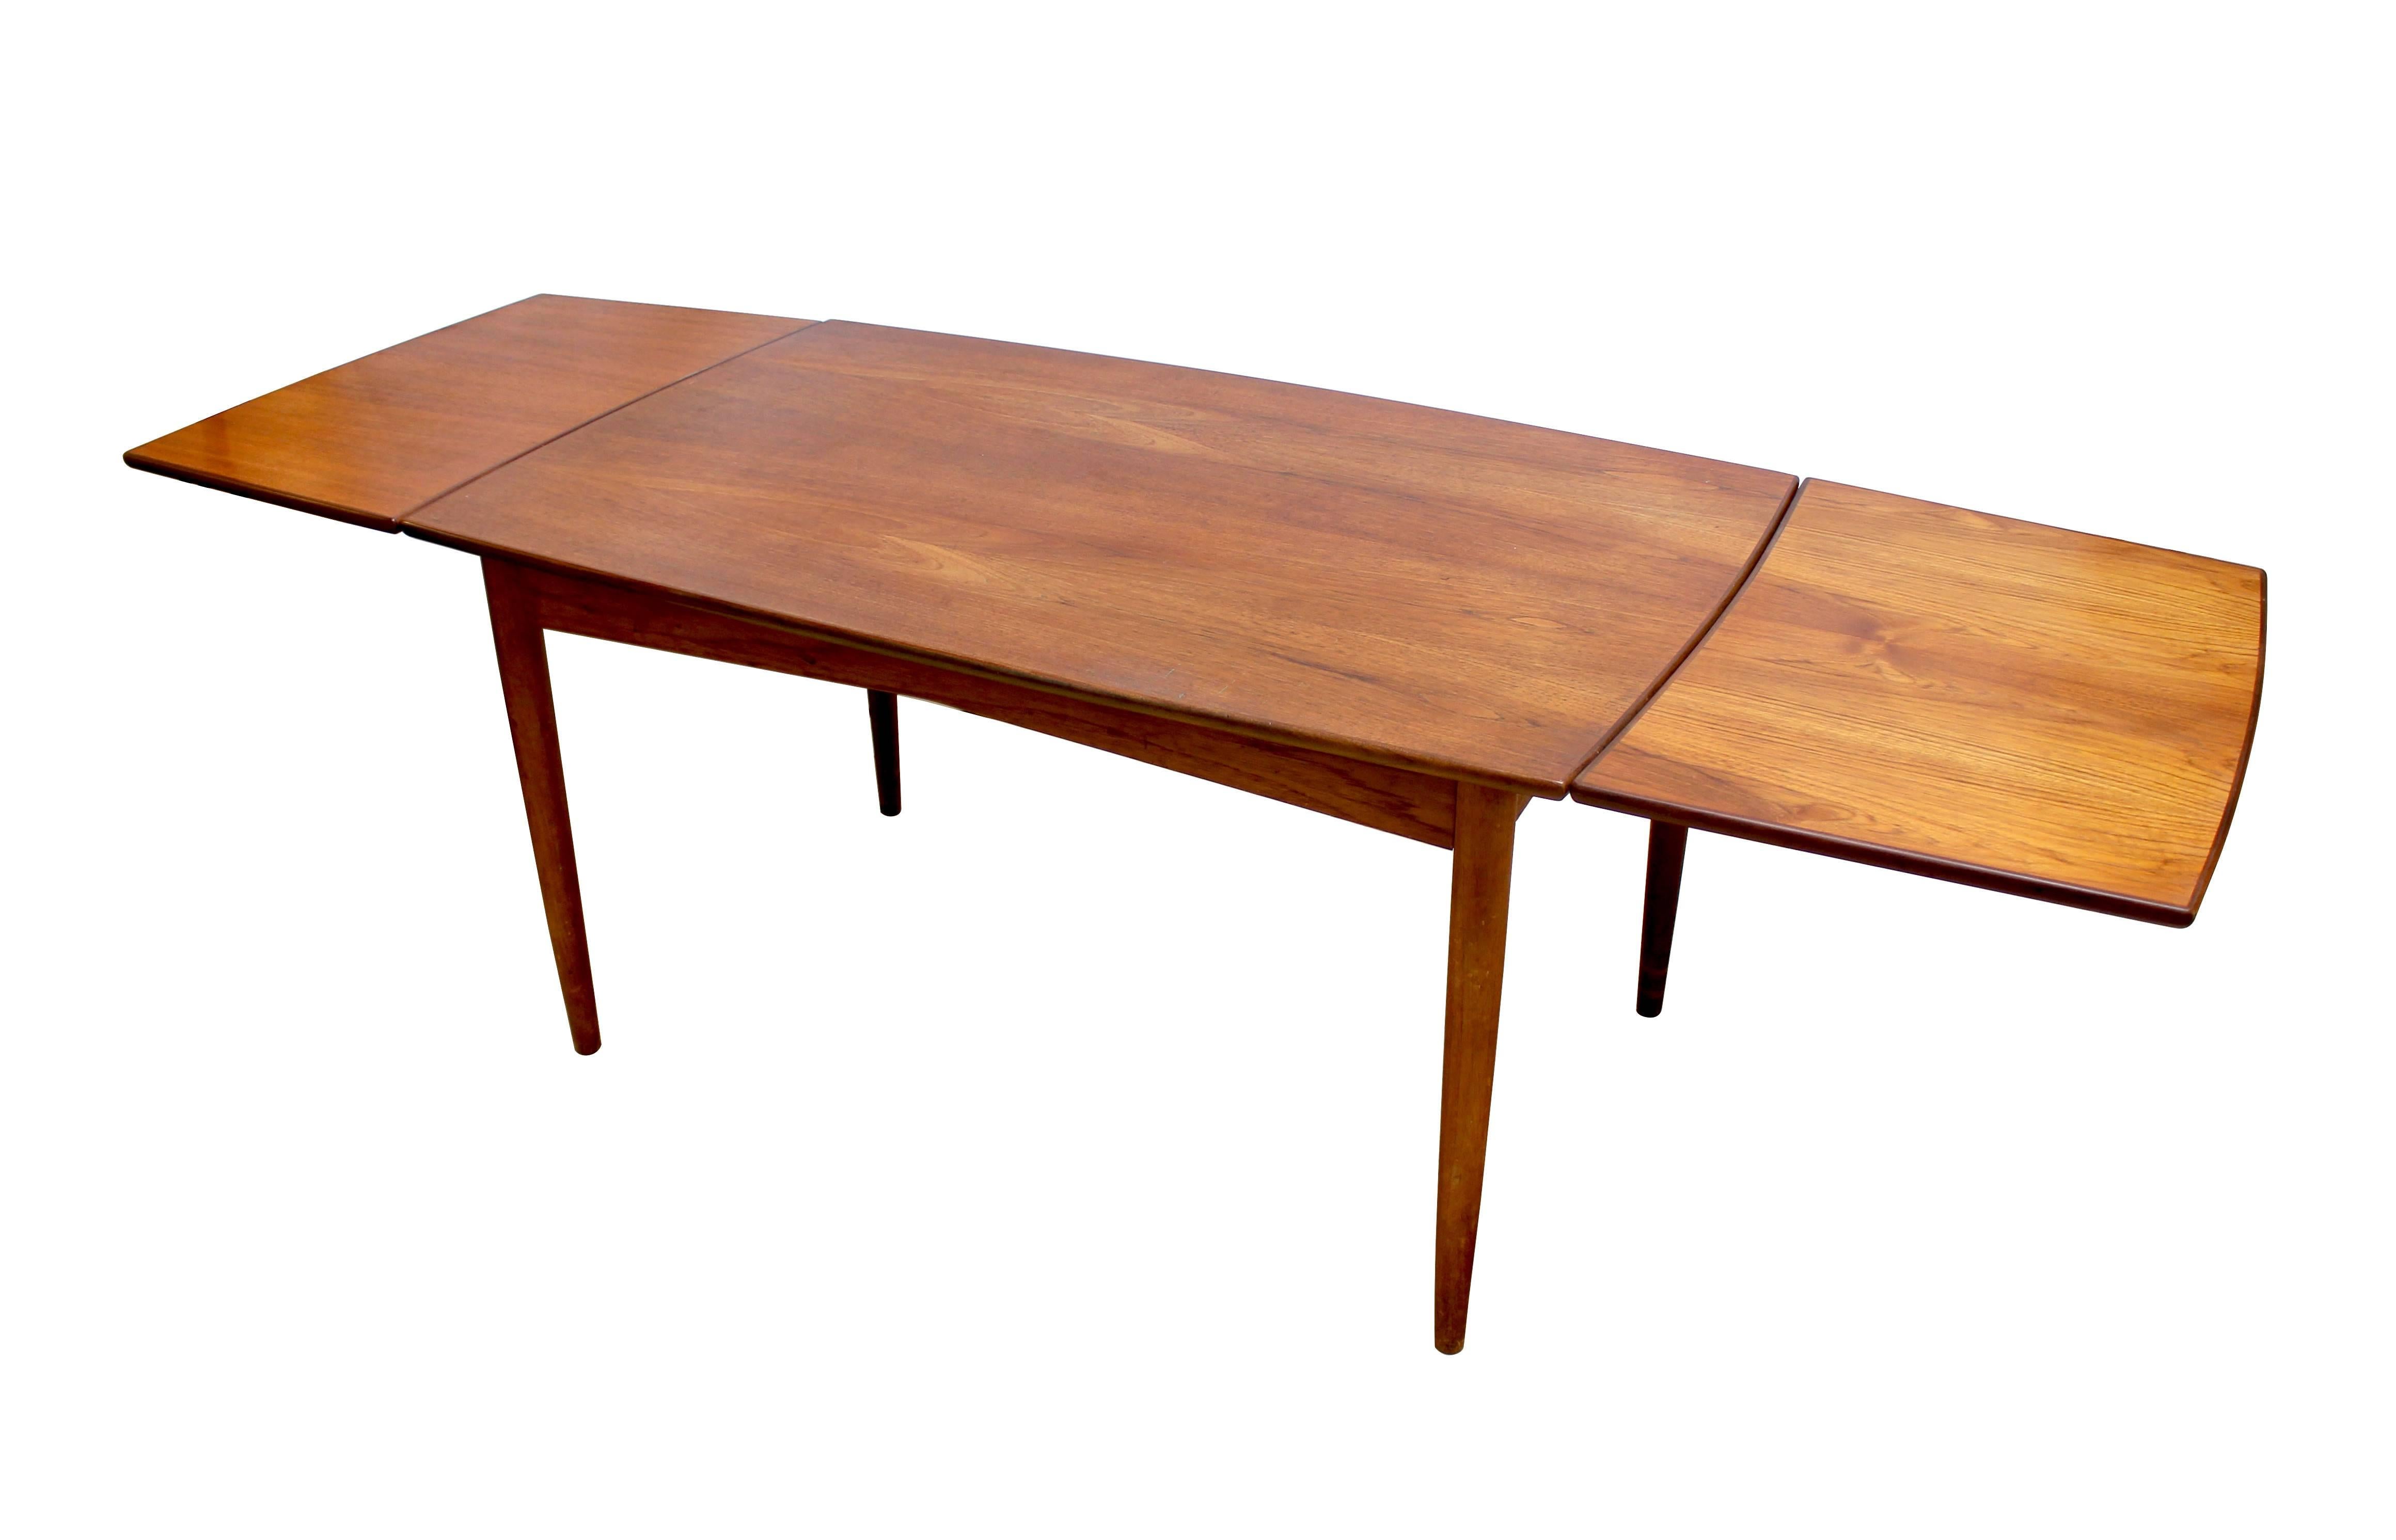 1960s Danish modern teak draw-leaf dining table in excellent condition with an elegant tapered design. The table measures 54.5